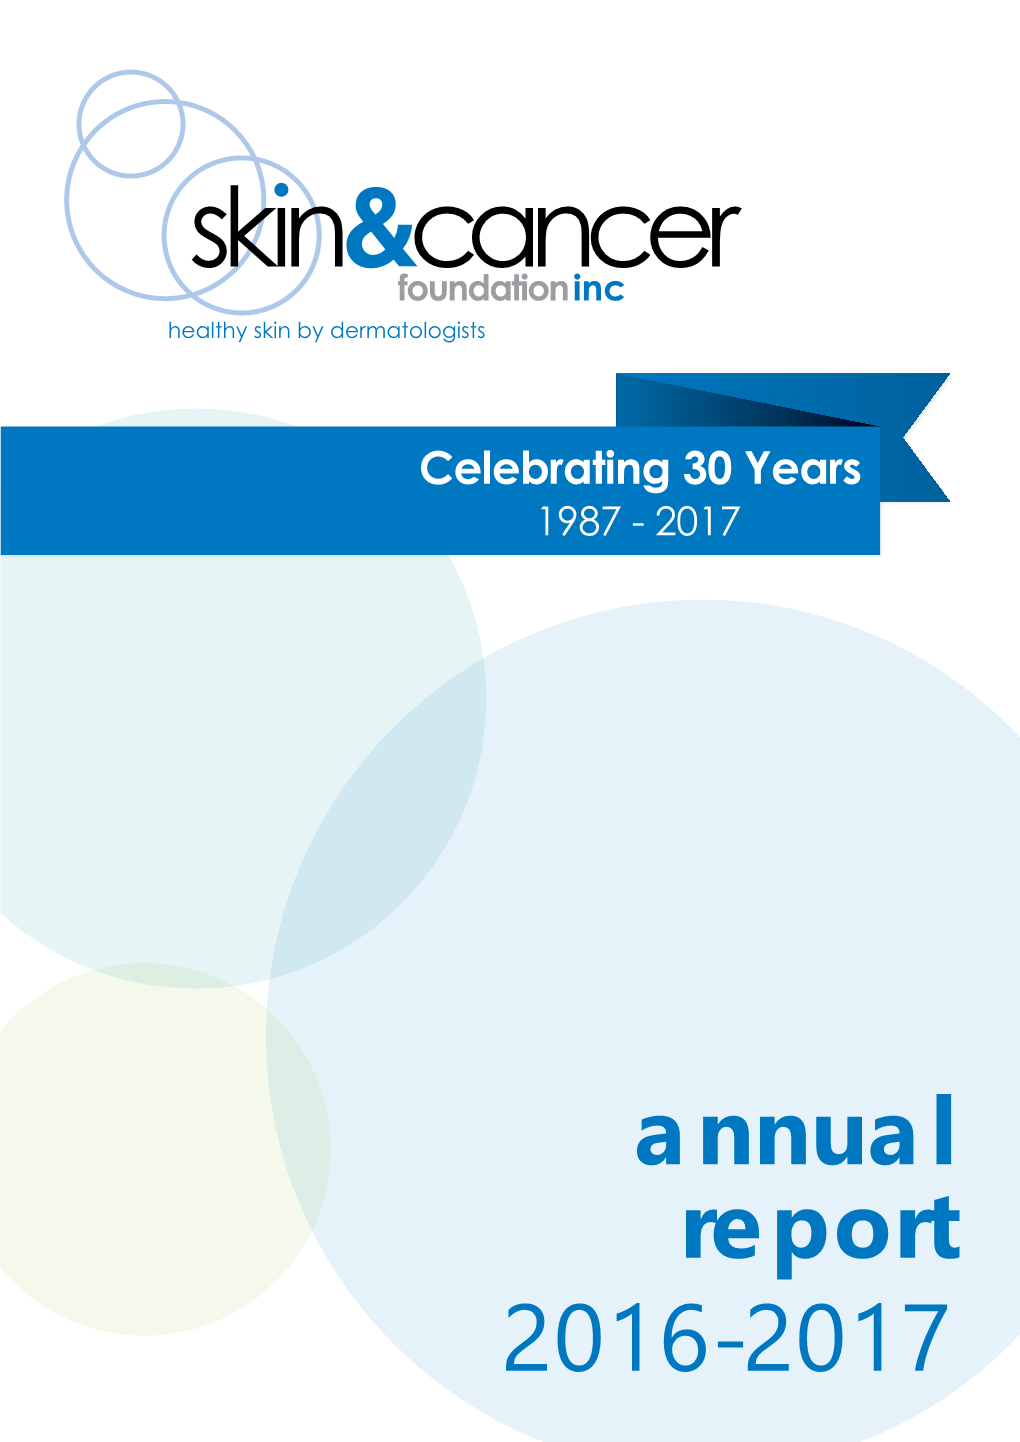 2016-17 Annual Report, Skin & Cancer Foundation Inc